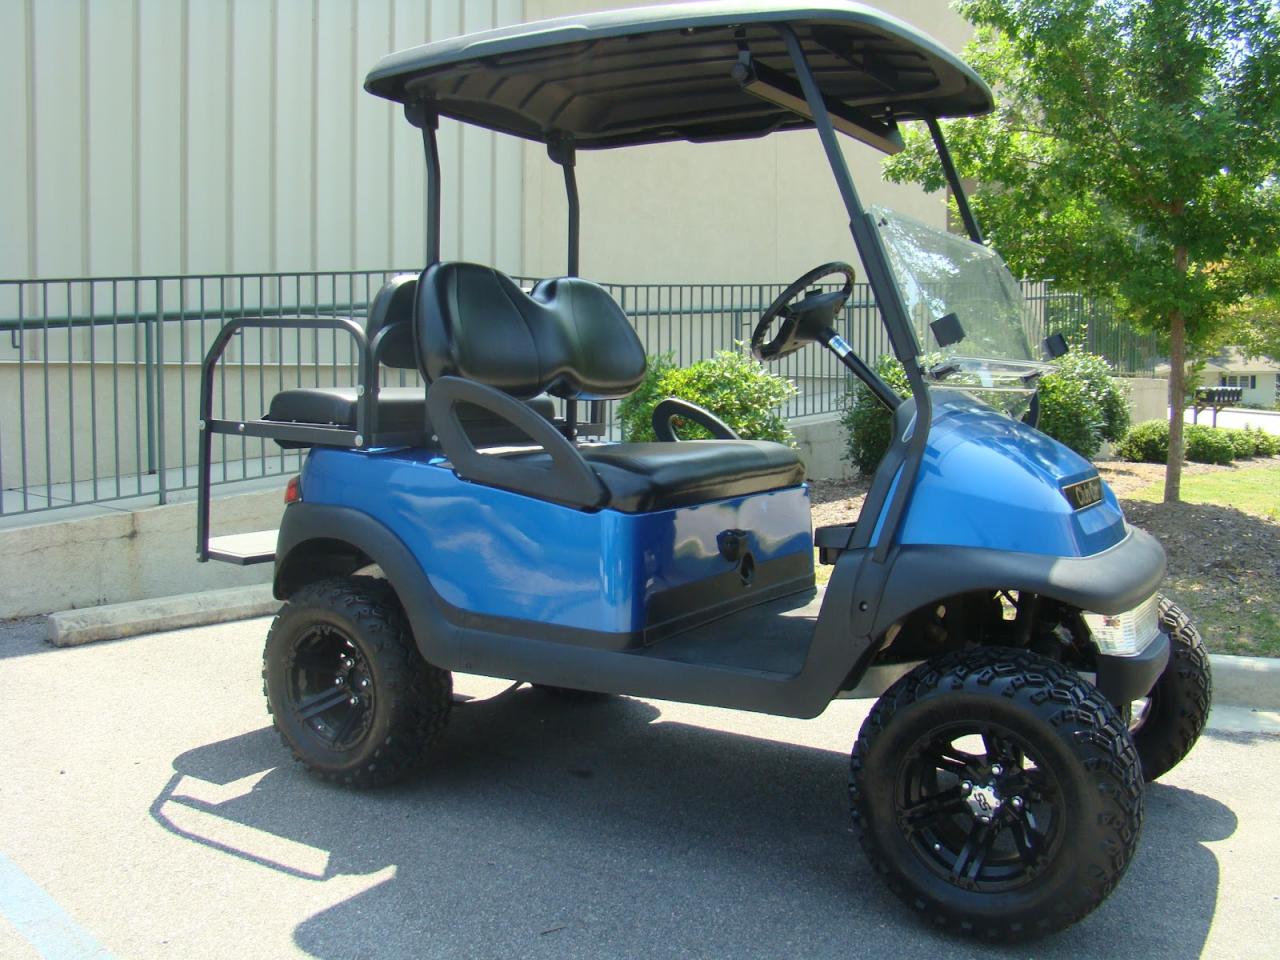 Used Golf Carts for Sale by Owner in San Luis Obispo, California: A Comprehensive Guide